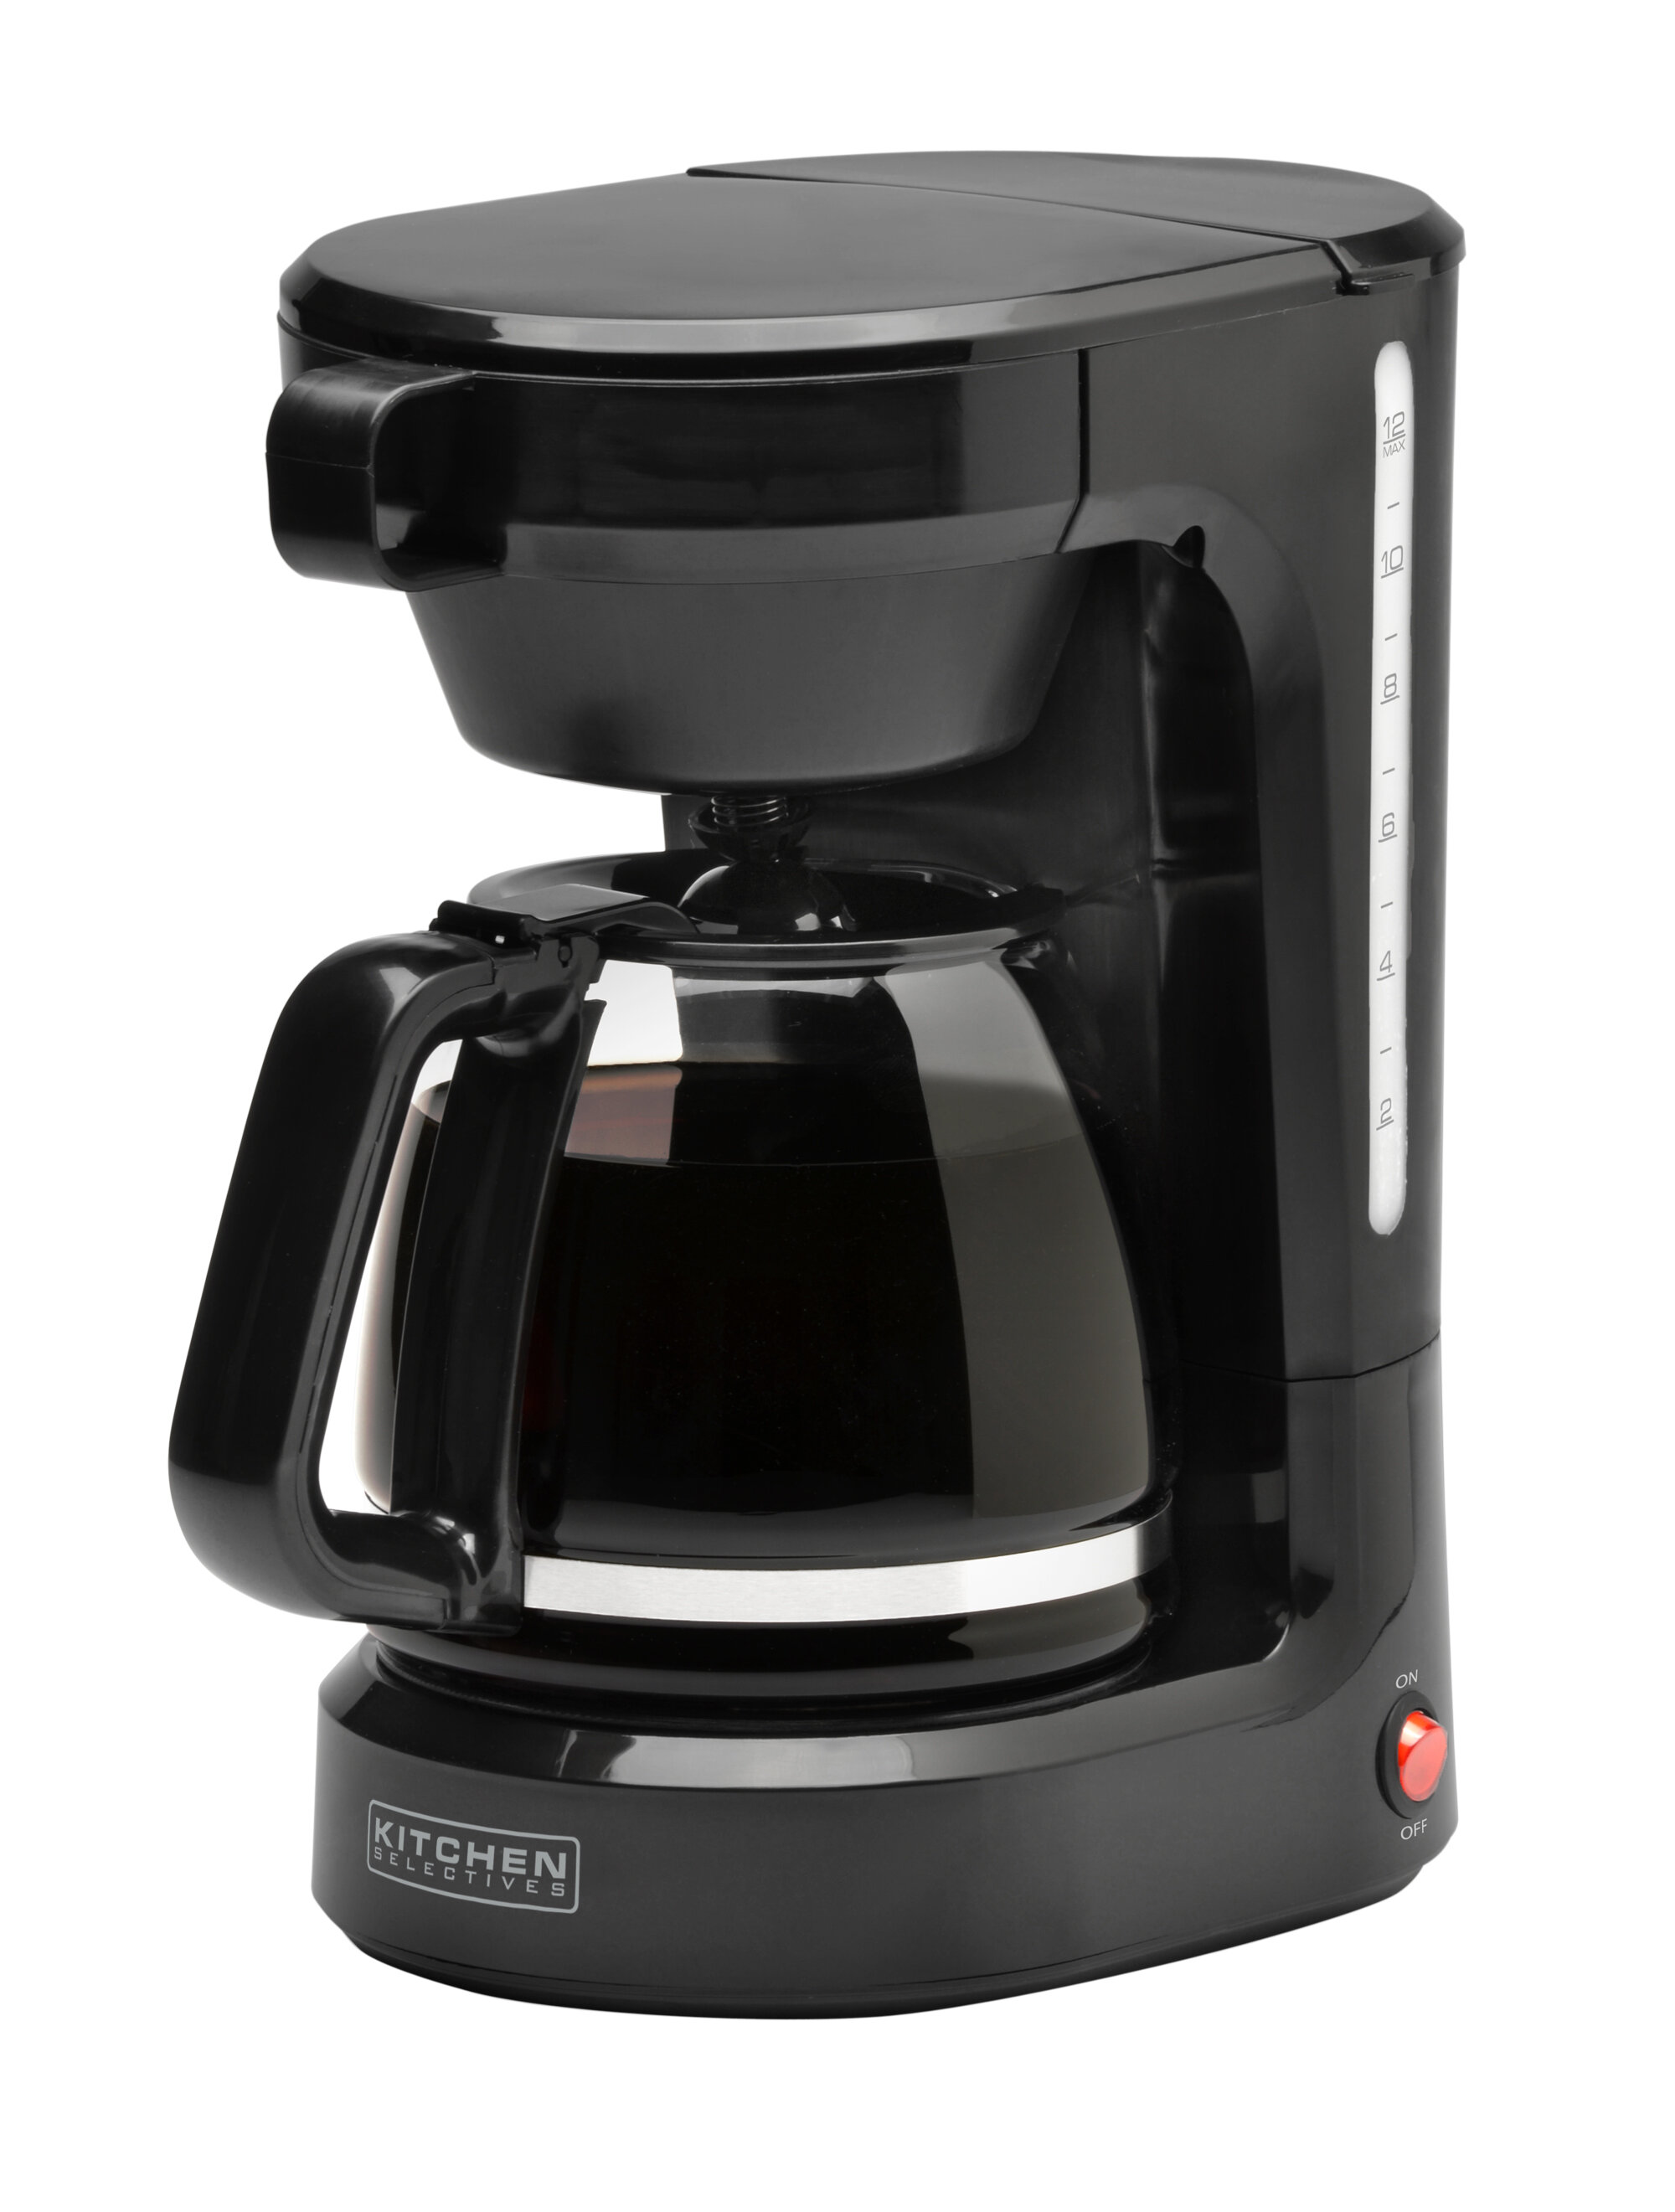 NEW Kitchen Selectives CM 688 1 Cup Single Serve Drip Coffee Maker Black 